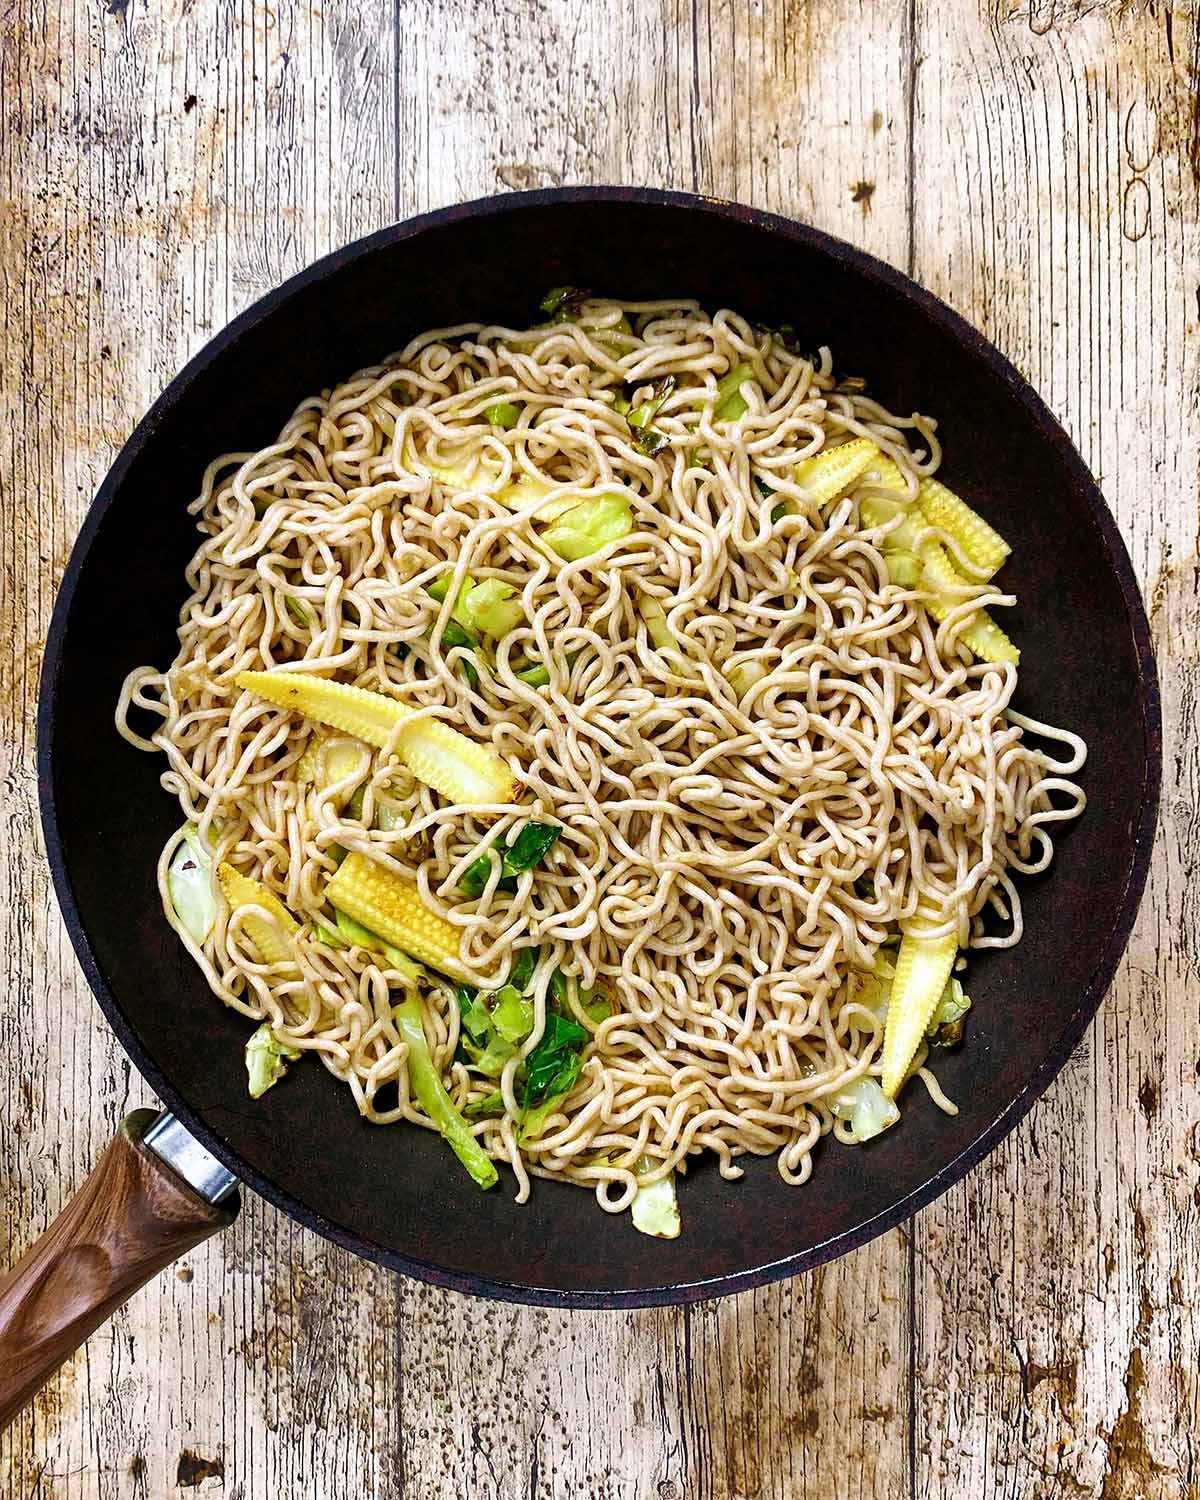 A frying pan with noodles, baby corn and cabbage stir frying.